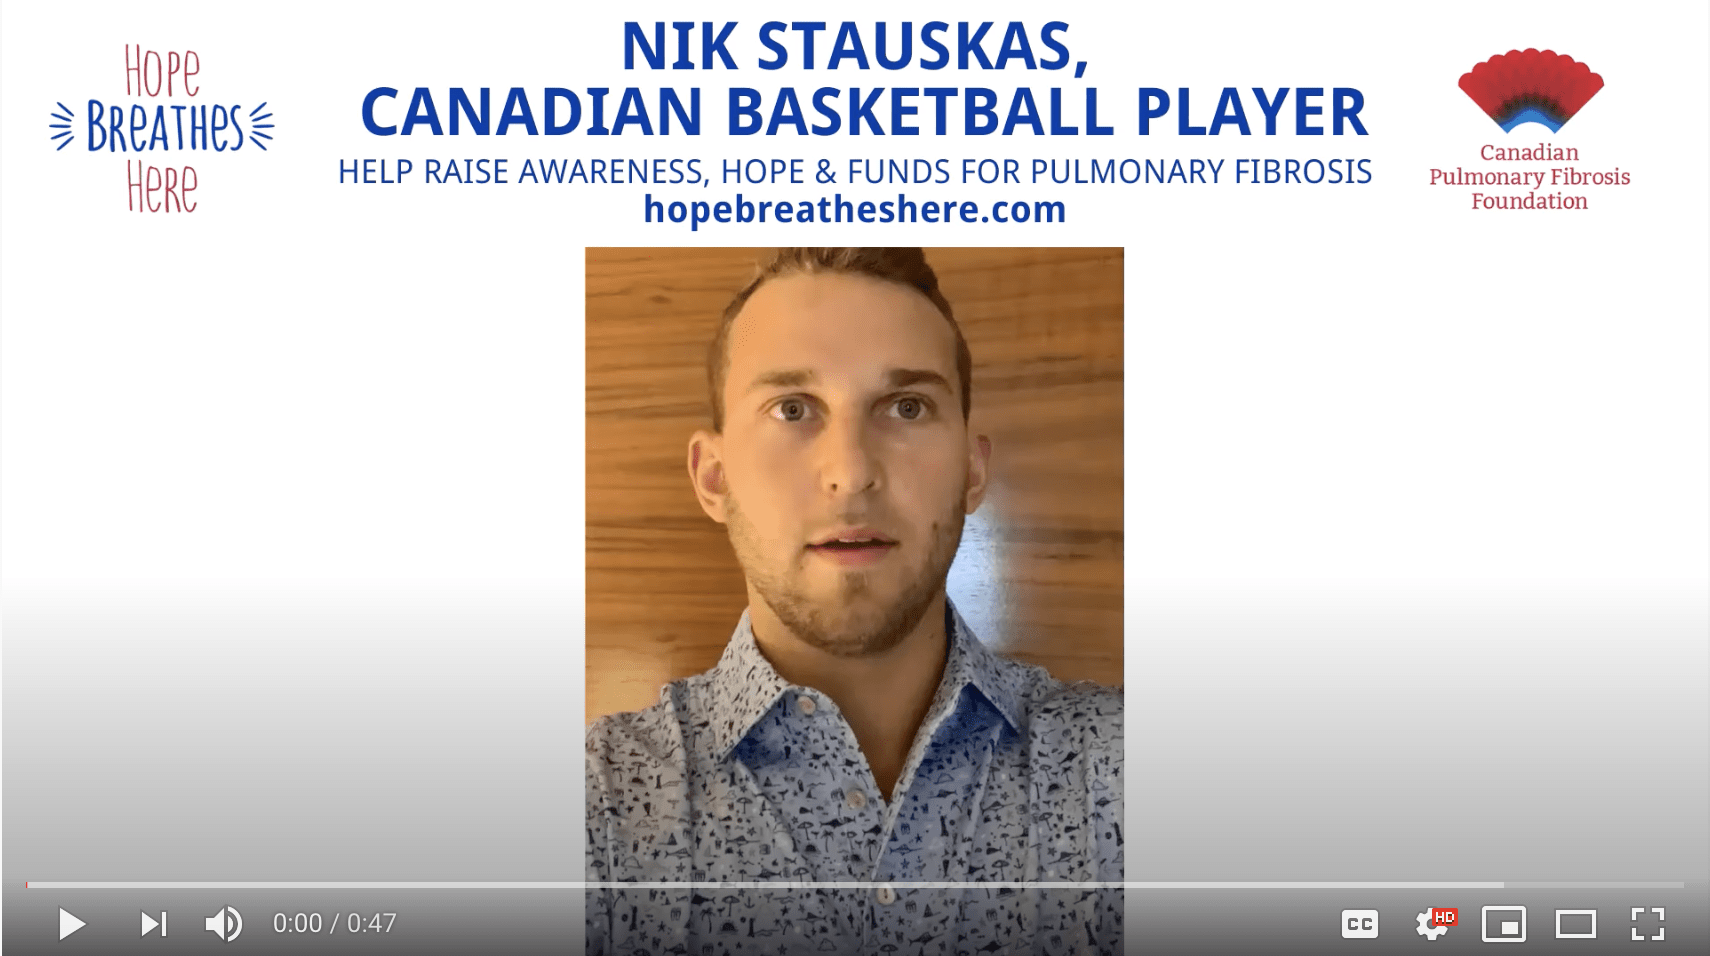 Nik Stauskas, Canadian Basketball Player Speaks Out For Pulmonary Fibrosis